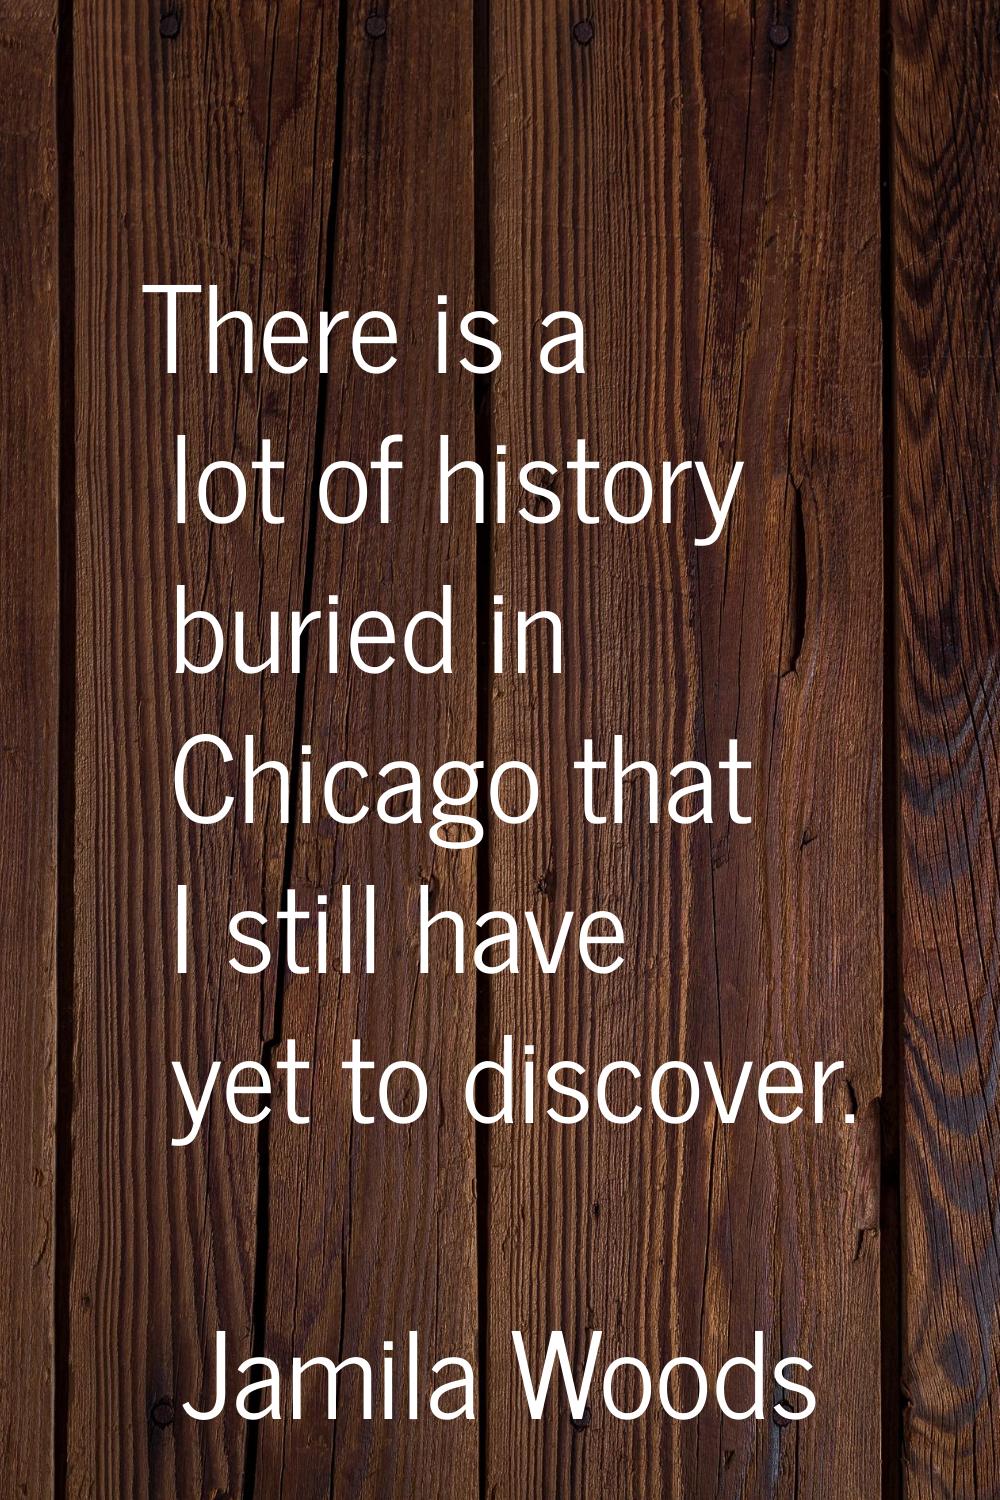 There is a lot of history buried in Chicago that I still have yet to discover.